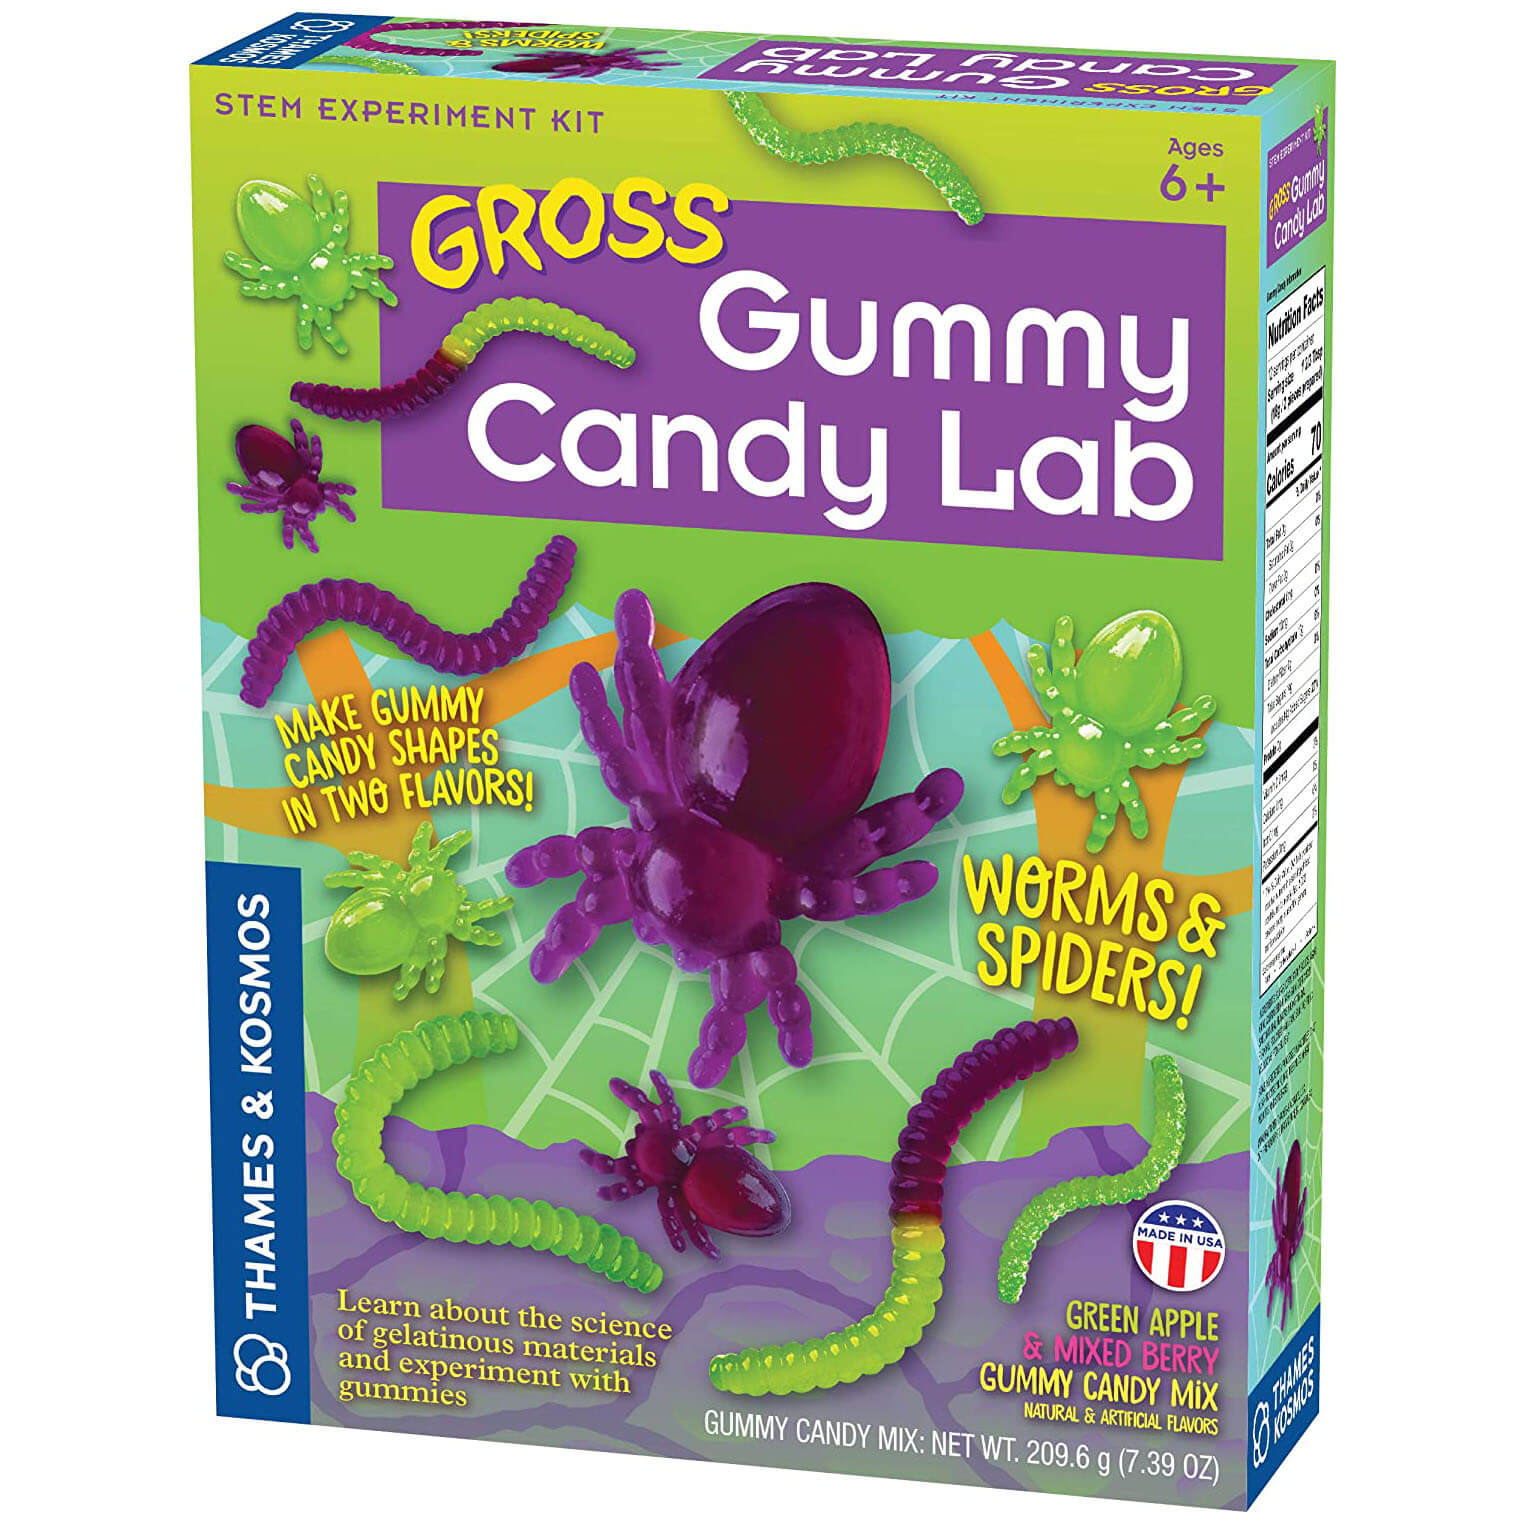 Gross Gummy Candy Lab: Worms & Spides